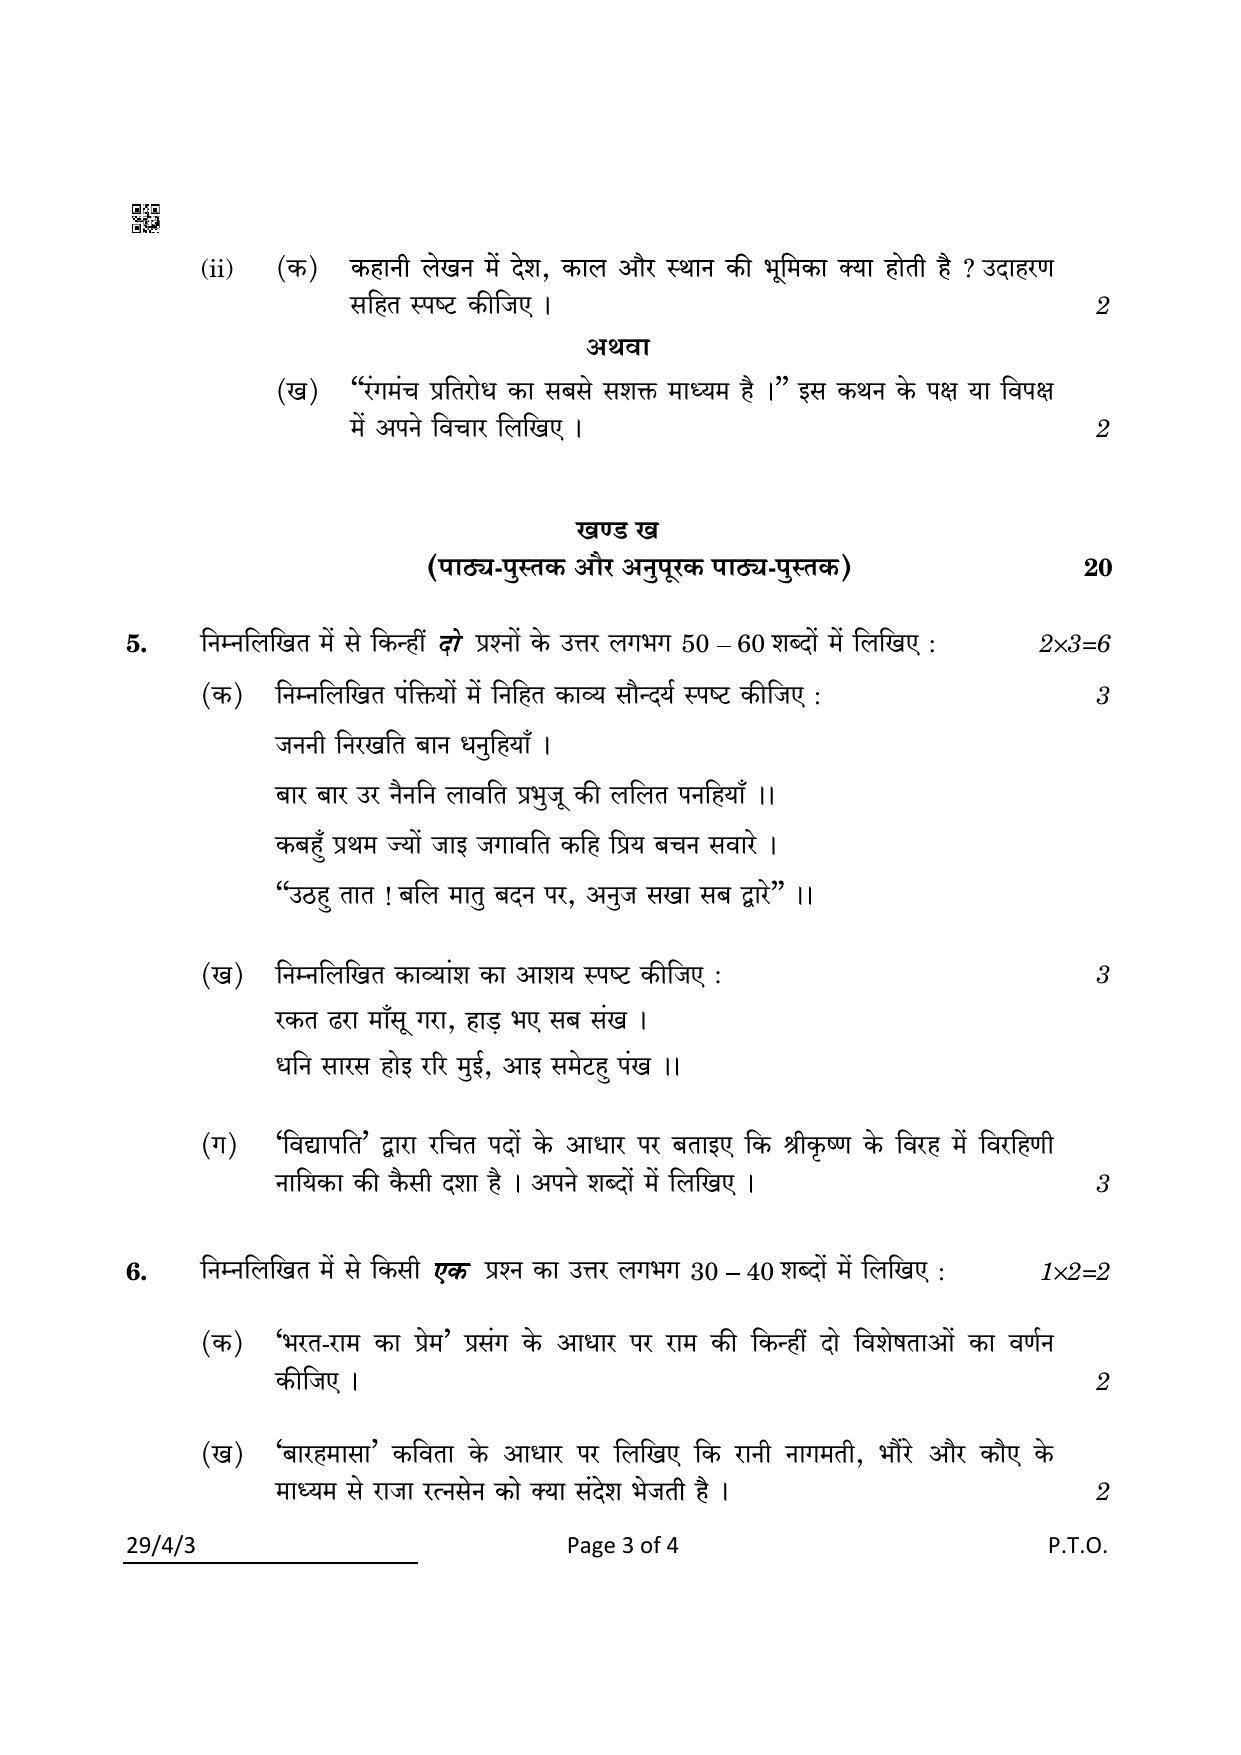 CBSE Class 12 29-4-3 Hindi Elective 2022 Question Paper - Page 3